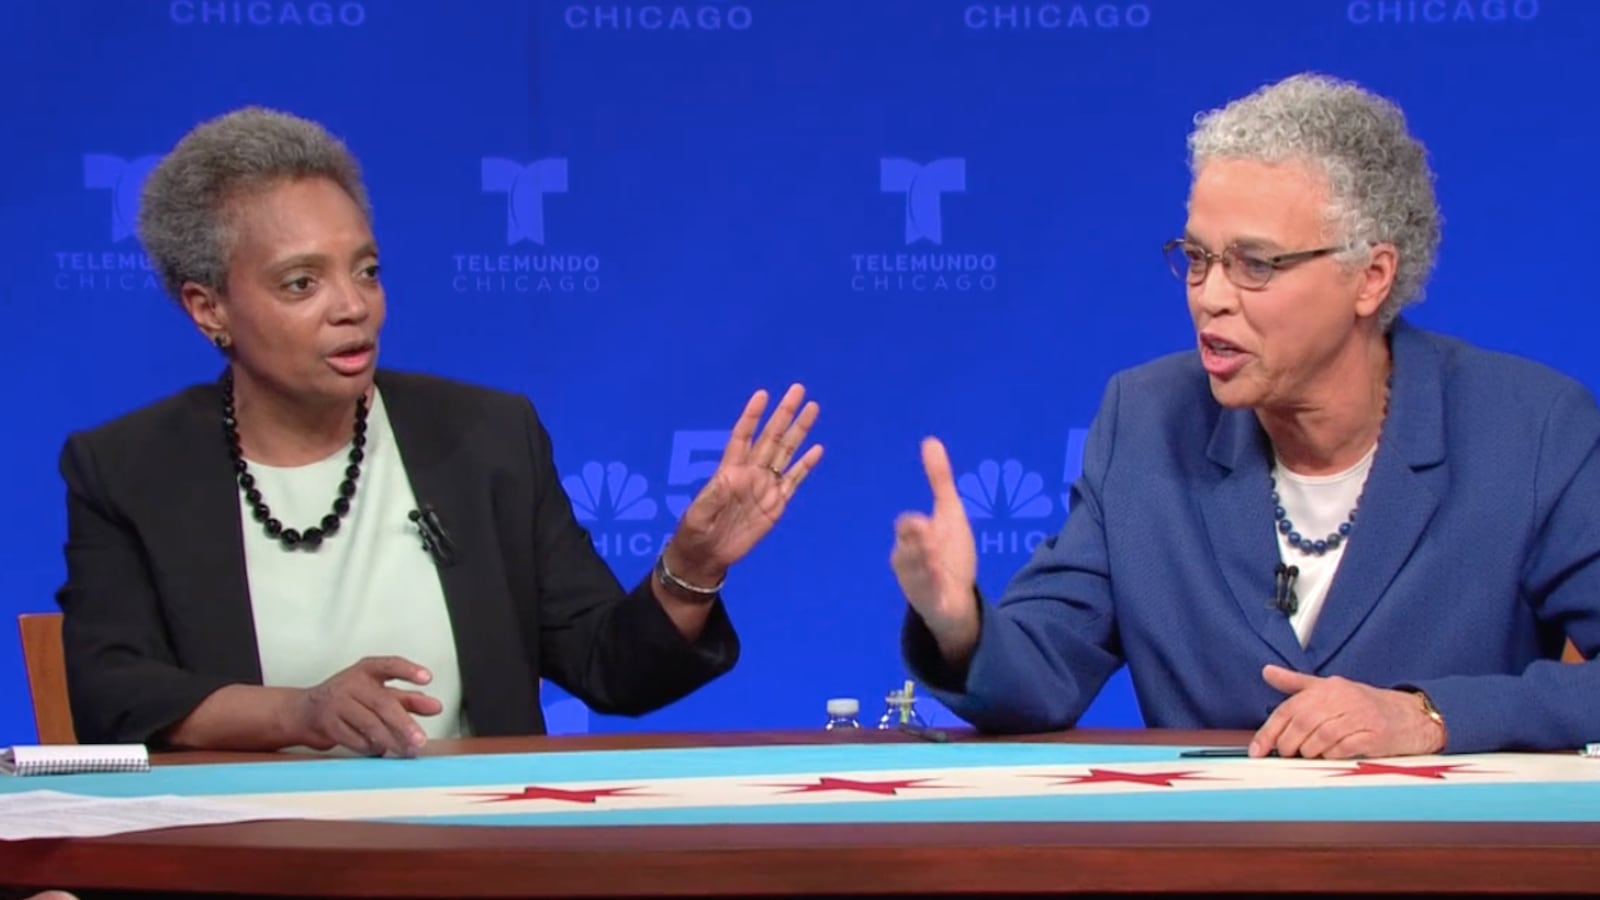 Chicago mayoral candidates Lori Lightfoot, left, and Toni Preckwinkle engaged in their first runoff debate March 7, 2019.